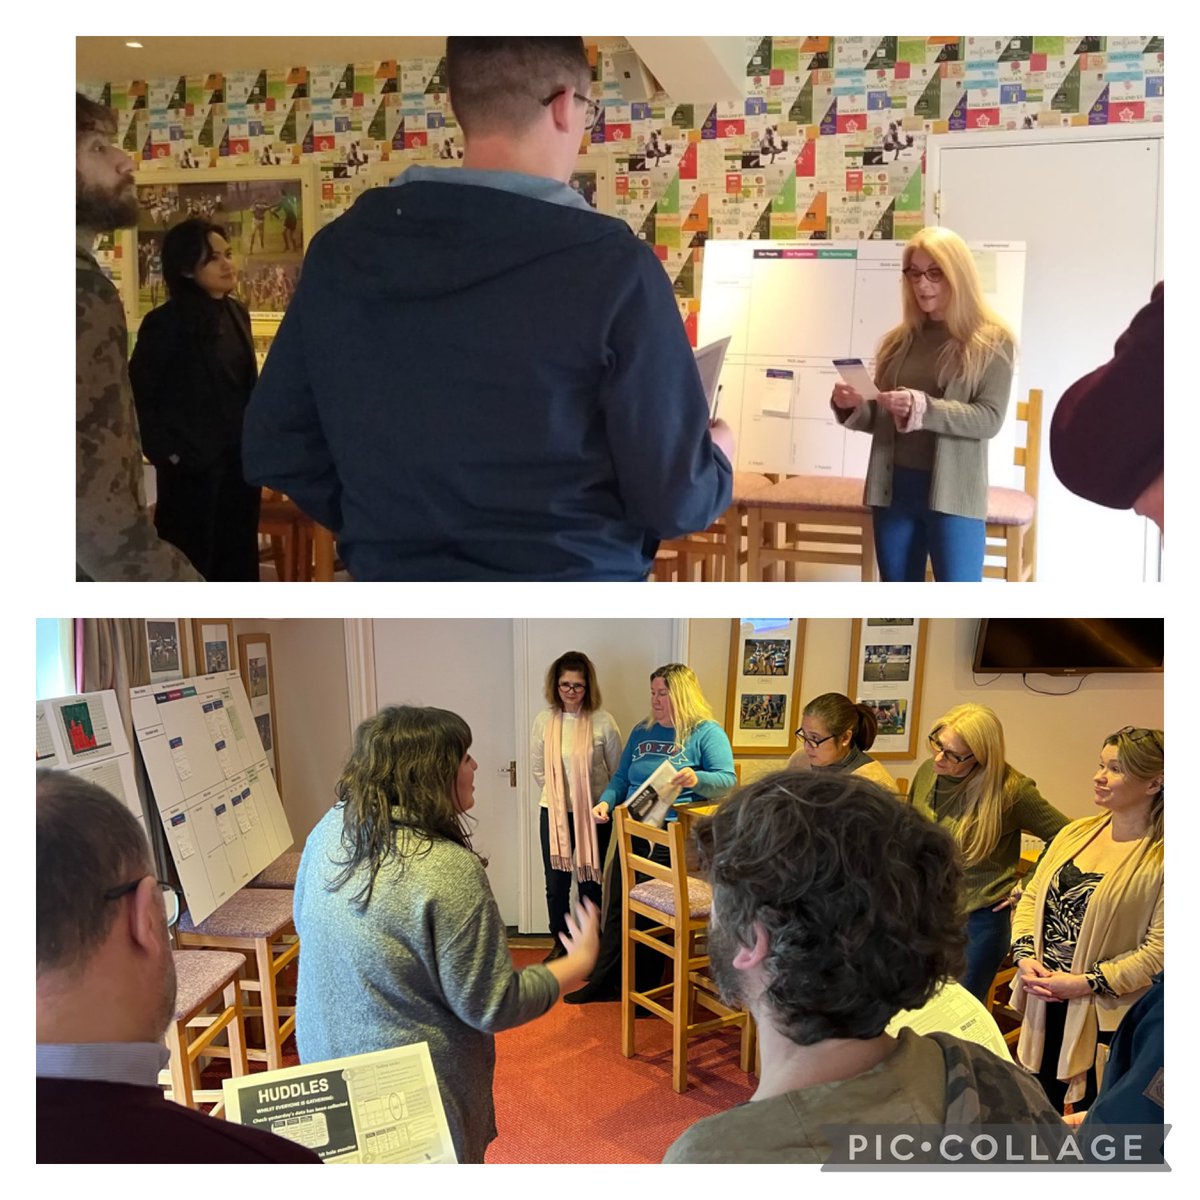 A3 Thinking, Improvement Huddle and a Coaching mindset are a few of the takeaways for today’s #ImprovingTogether session. Fantastic engagement! ⁦@SalisburyNHS⁩ ⁦@BSW_Together⁩ @liverandbunions⁩ ⁦@GulliverCox⁩ ⁦@SharonCousins3⁩